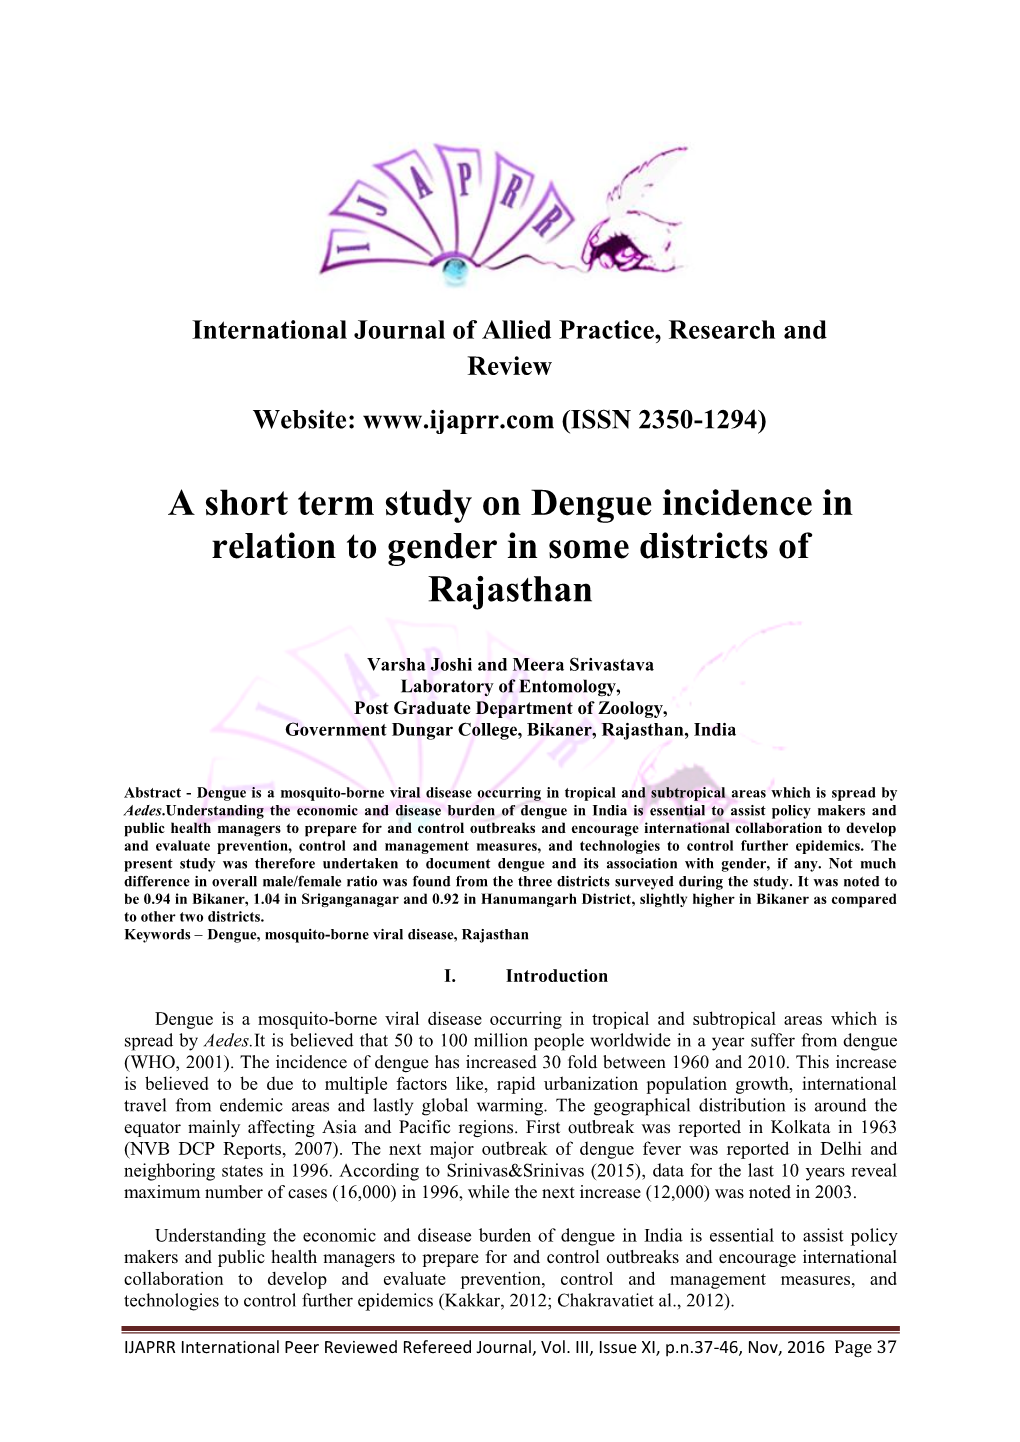 A Short Term Study on Dengue Incidence in Relation to Gender in Some Districts of Rajasthan